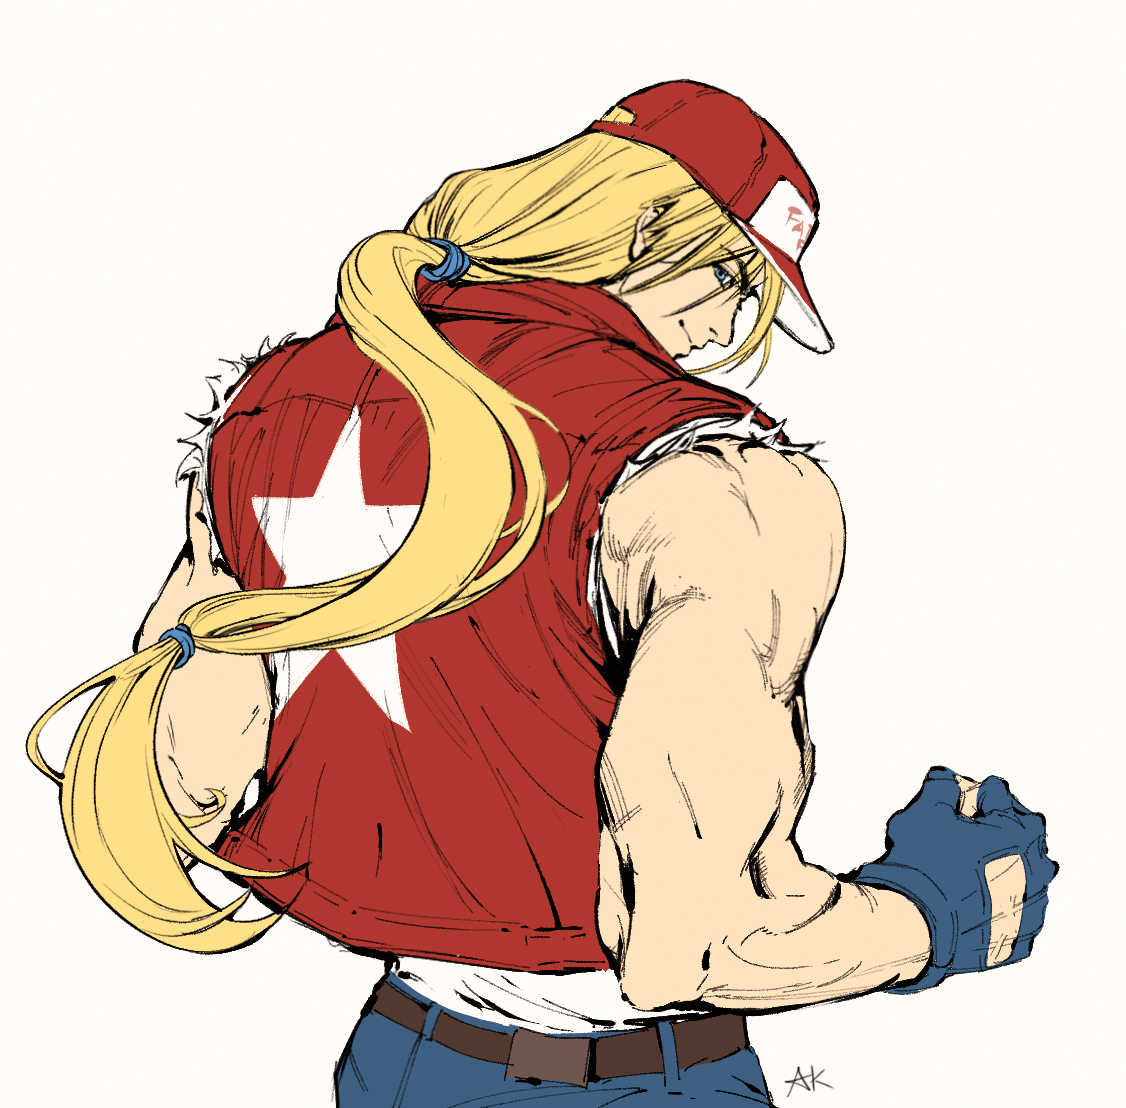 Just want to touch Terry's ponytail...
 #fatalfury 
#テリーボガード 
#餓狼伝説
#KOF